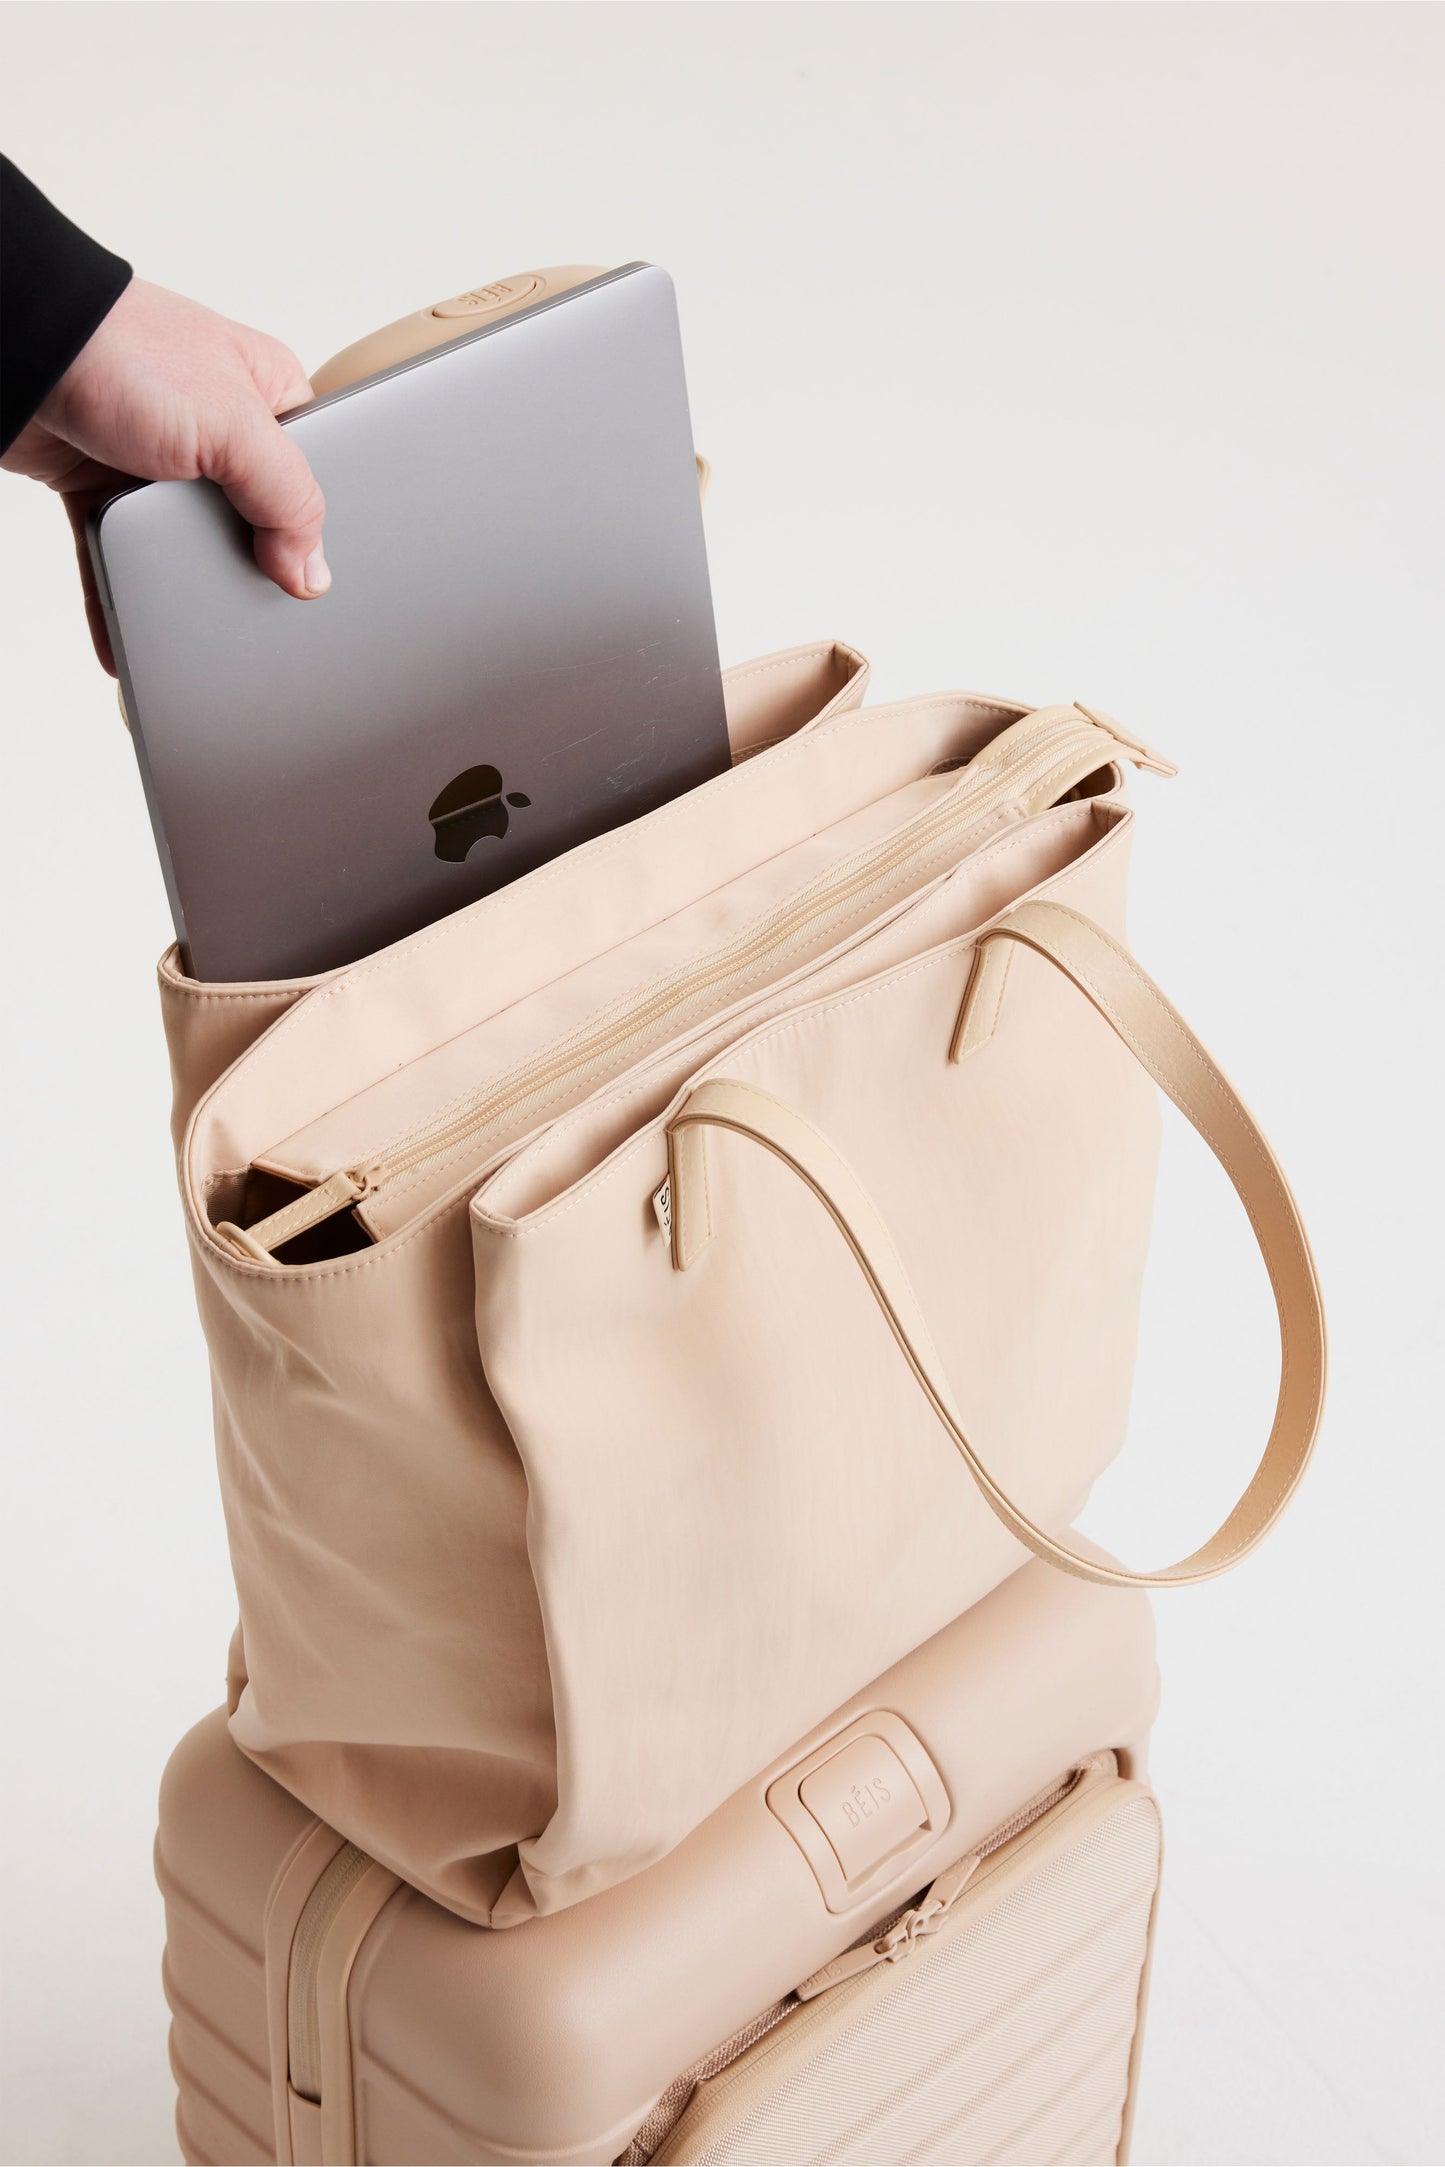 The Commuter Tote In Beige